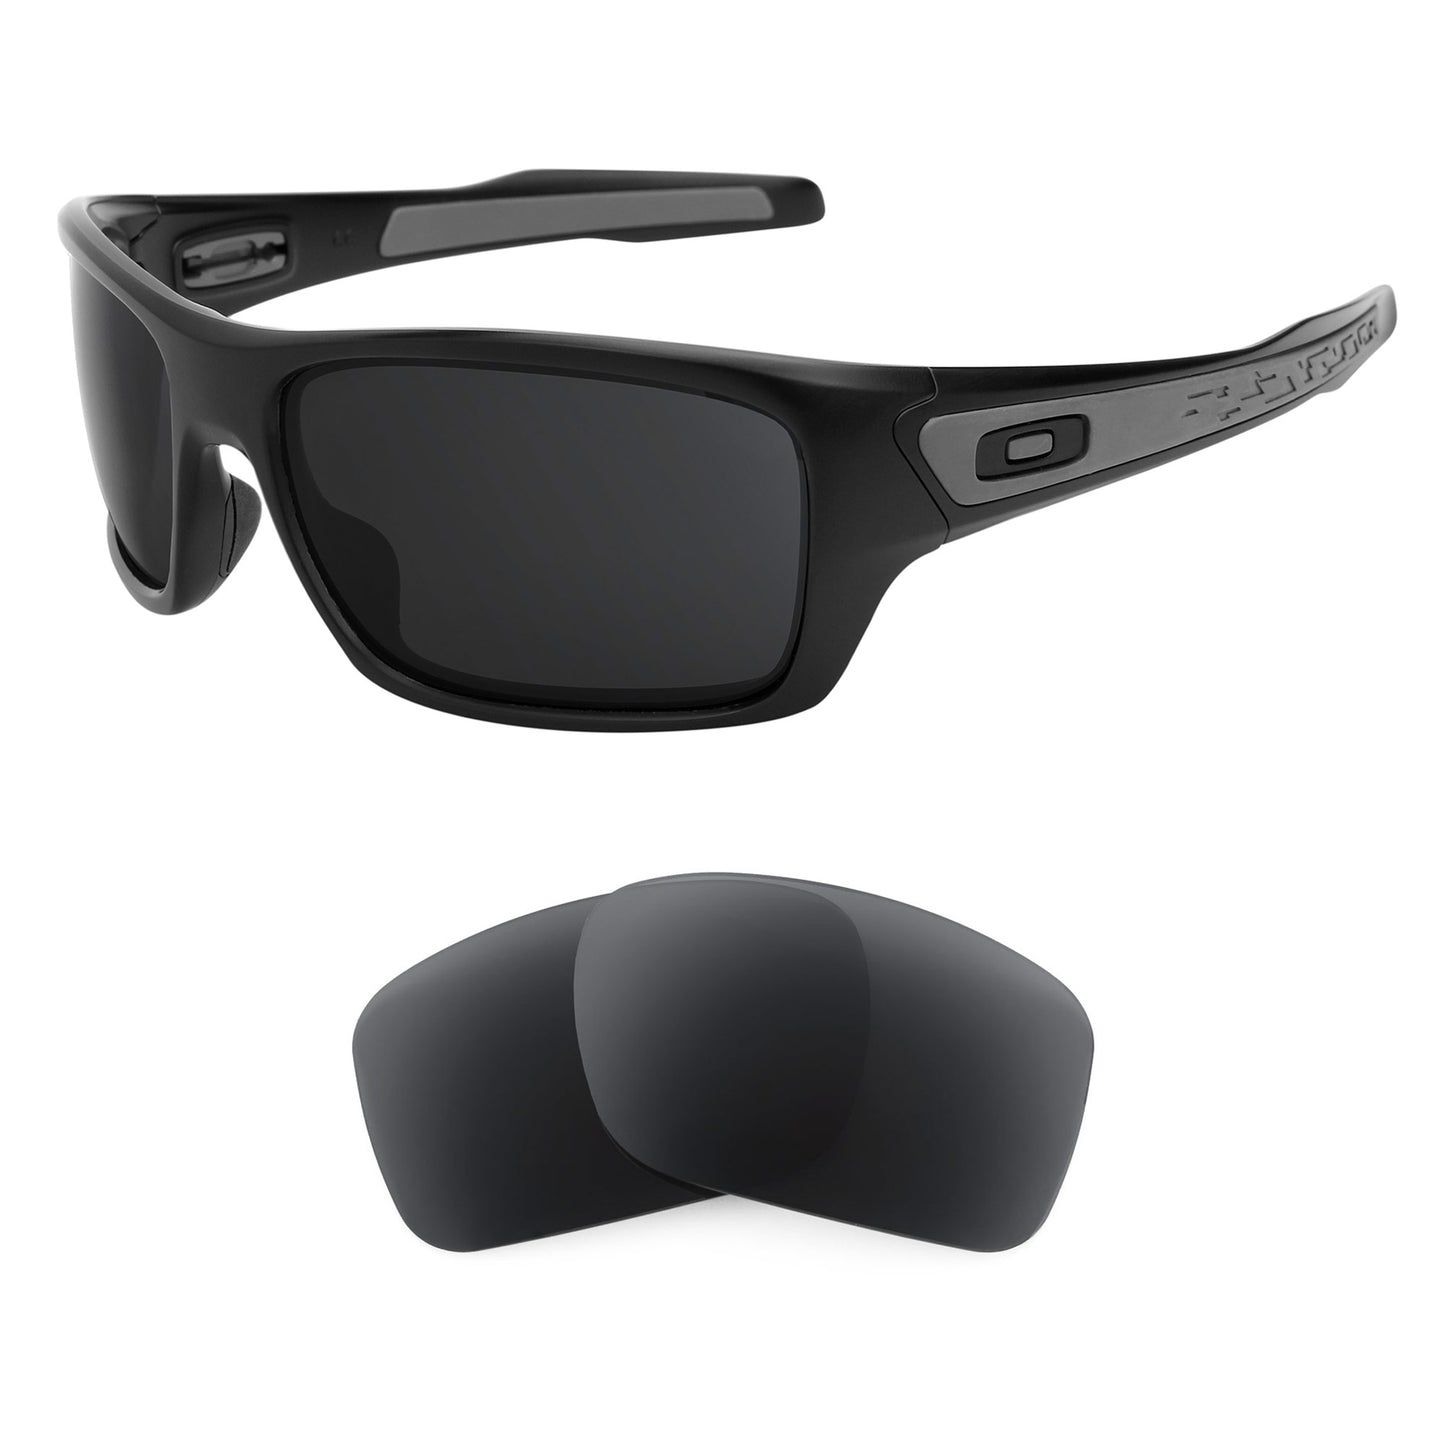 Oakley Turbine sunglasses with replacement lenses